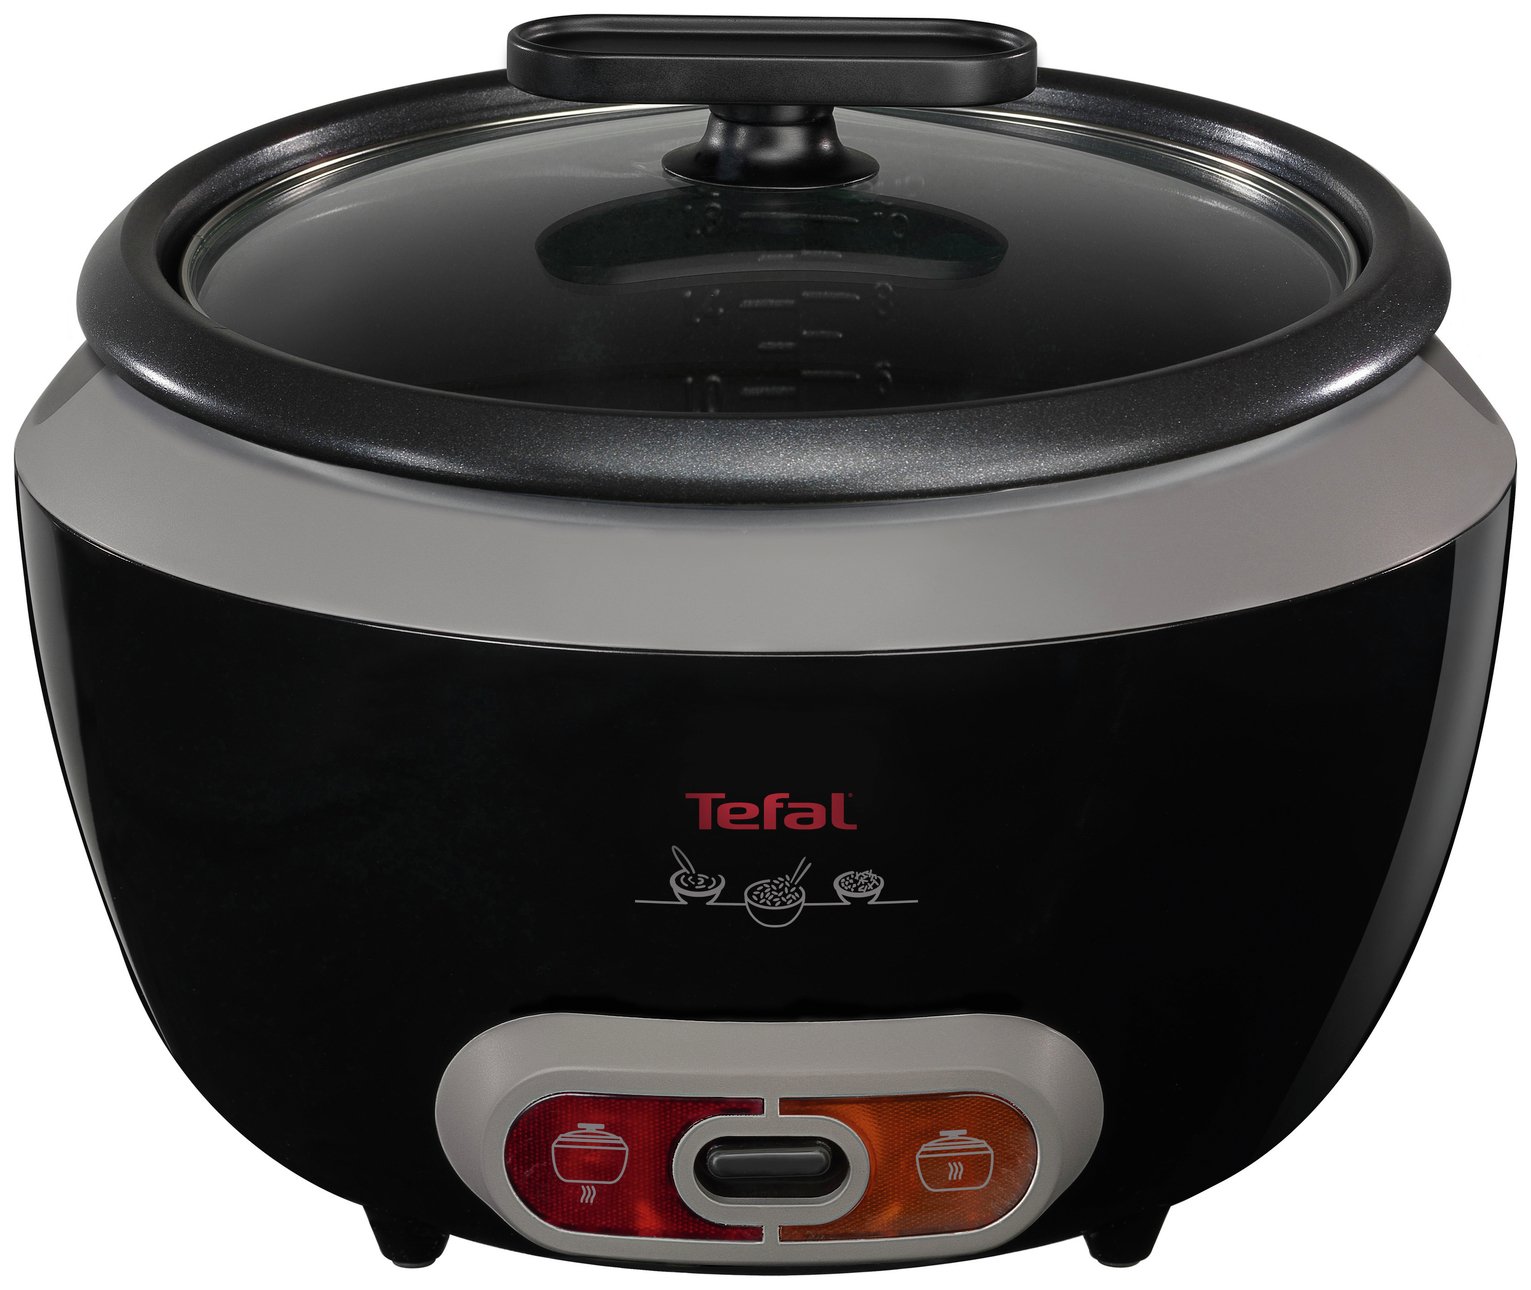 Tefal Rice Cooker Review